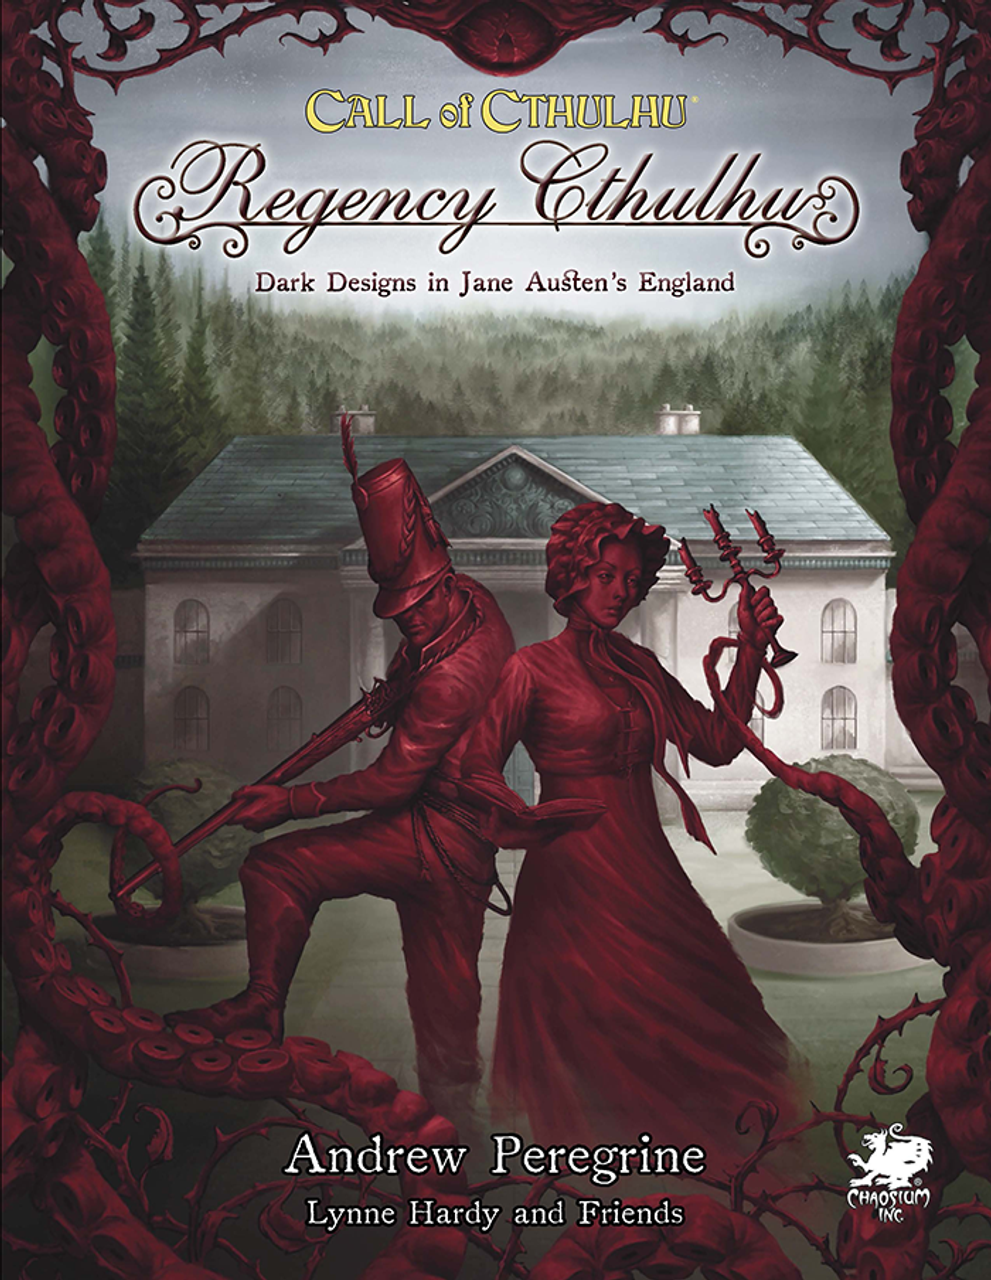 Call of Cthulhu: Regency Cthulhu - A Review